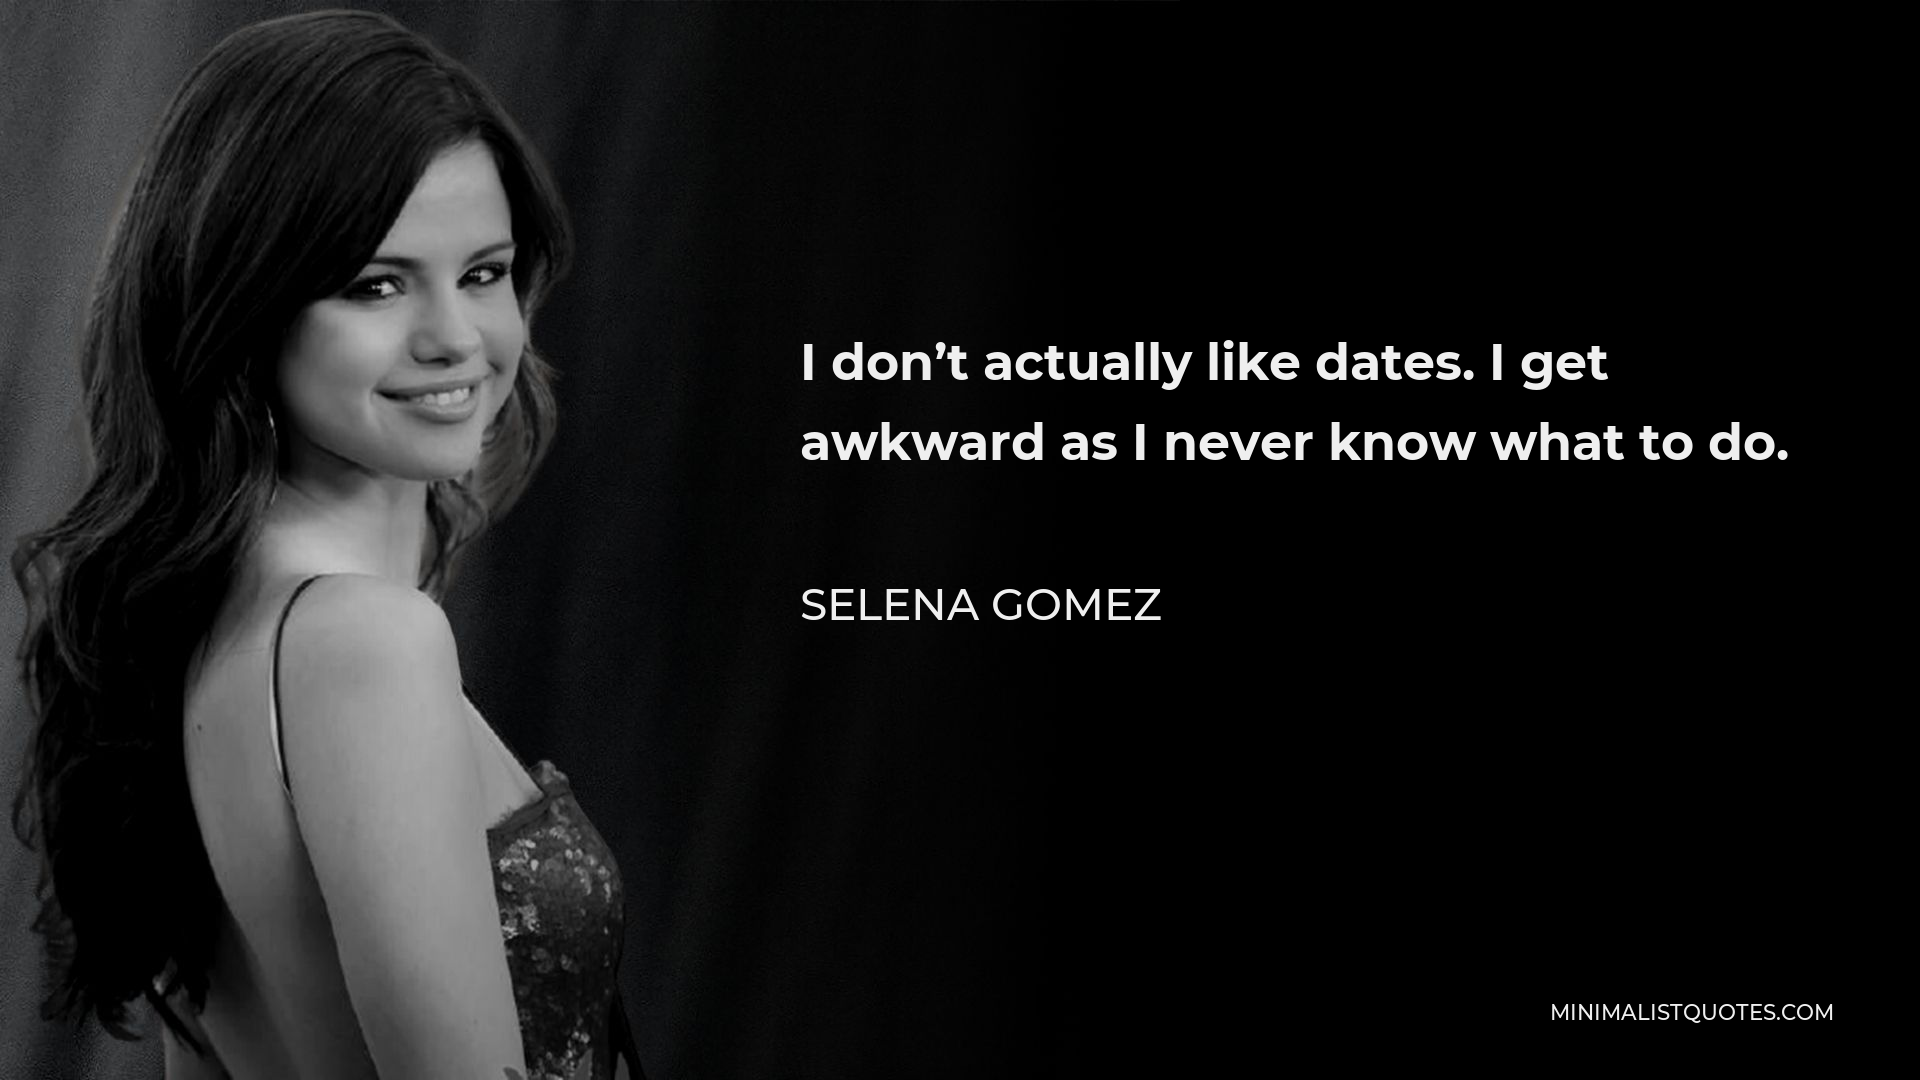 Selena Gomez Quote - I don’t actually like dates. I get awkward as I never know what to do.